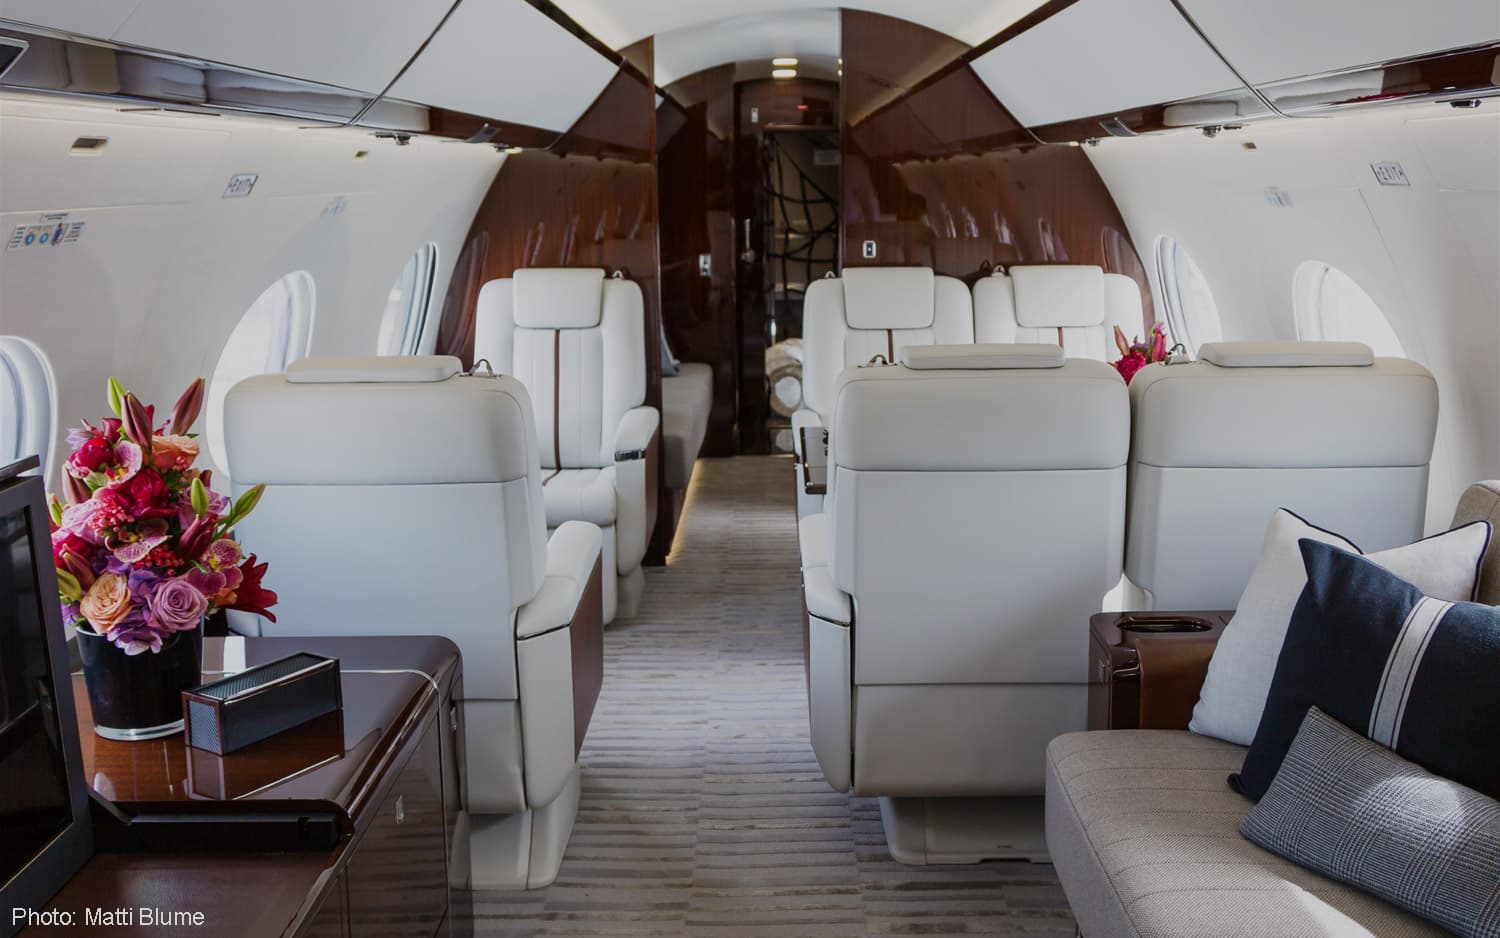 How private jets have benefitted from the pandemic